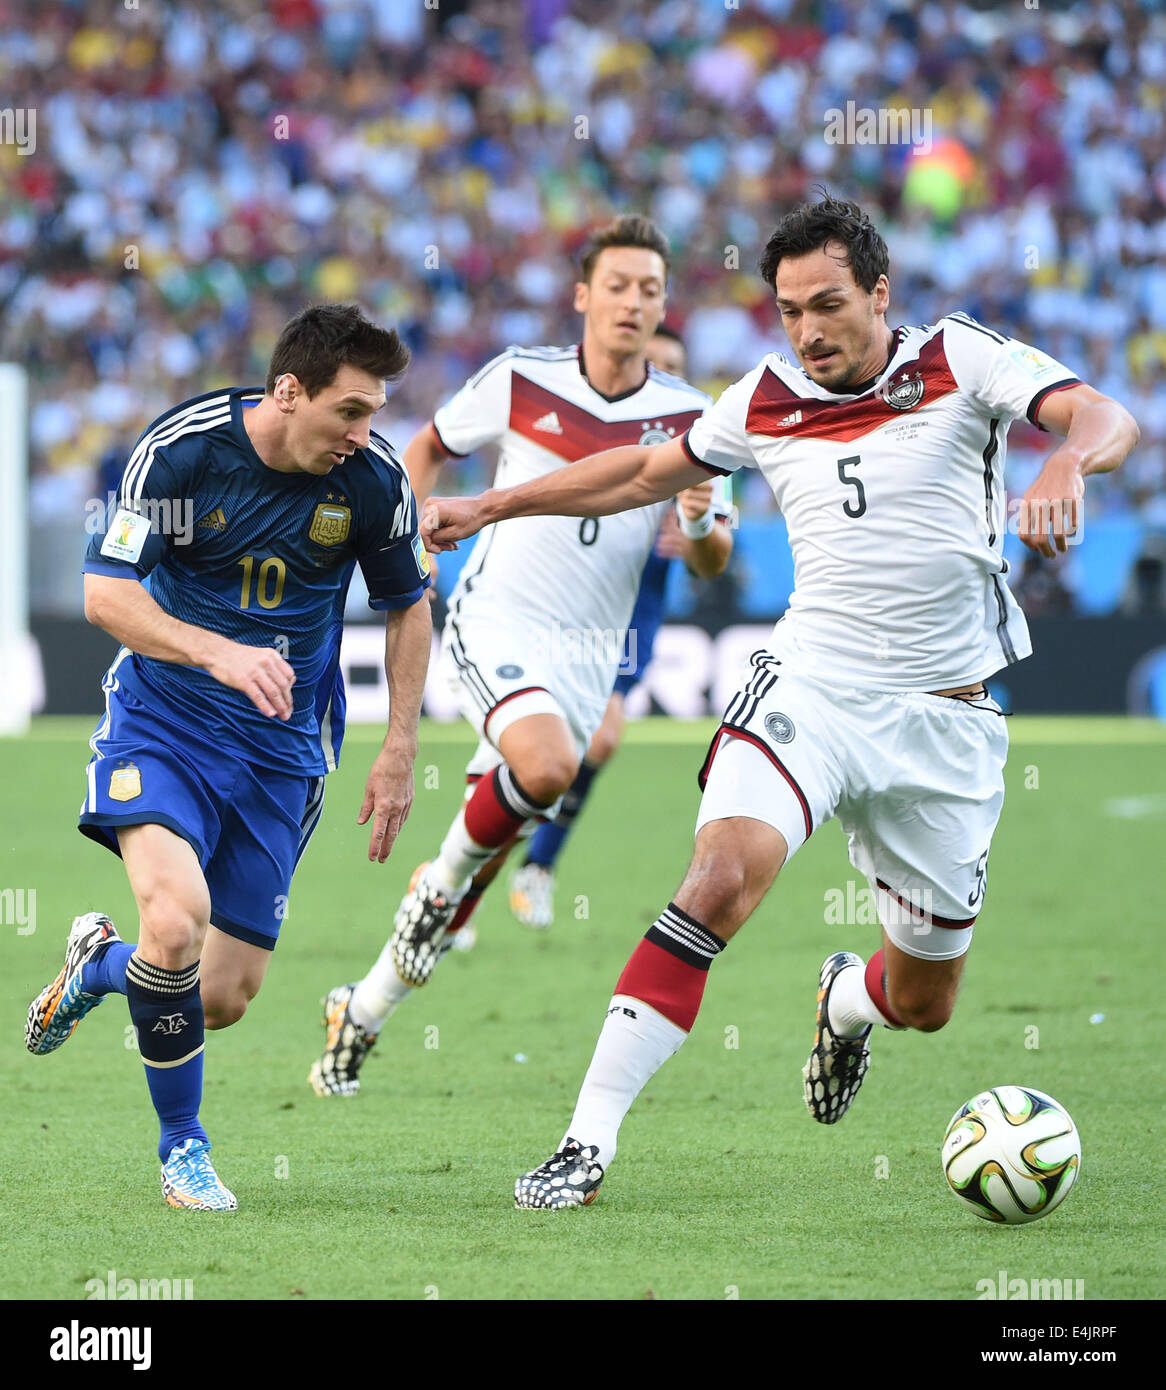 Rio De Janeiro, Brazil. 13th July, 2014. Argentina's Lionel Messi (L) vies with Germany's Mats Hummels during the final match between Germany and Argentina of 2014 FIFA World Cup at the Estadio do Maracana Stadium in Rio de Janeiro, Brazil, on July 13, 2014. Credit:  Liu Dawei/Xinhua/Alamy Live News Stock Photo